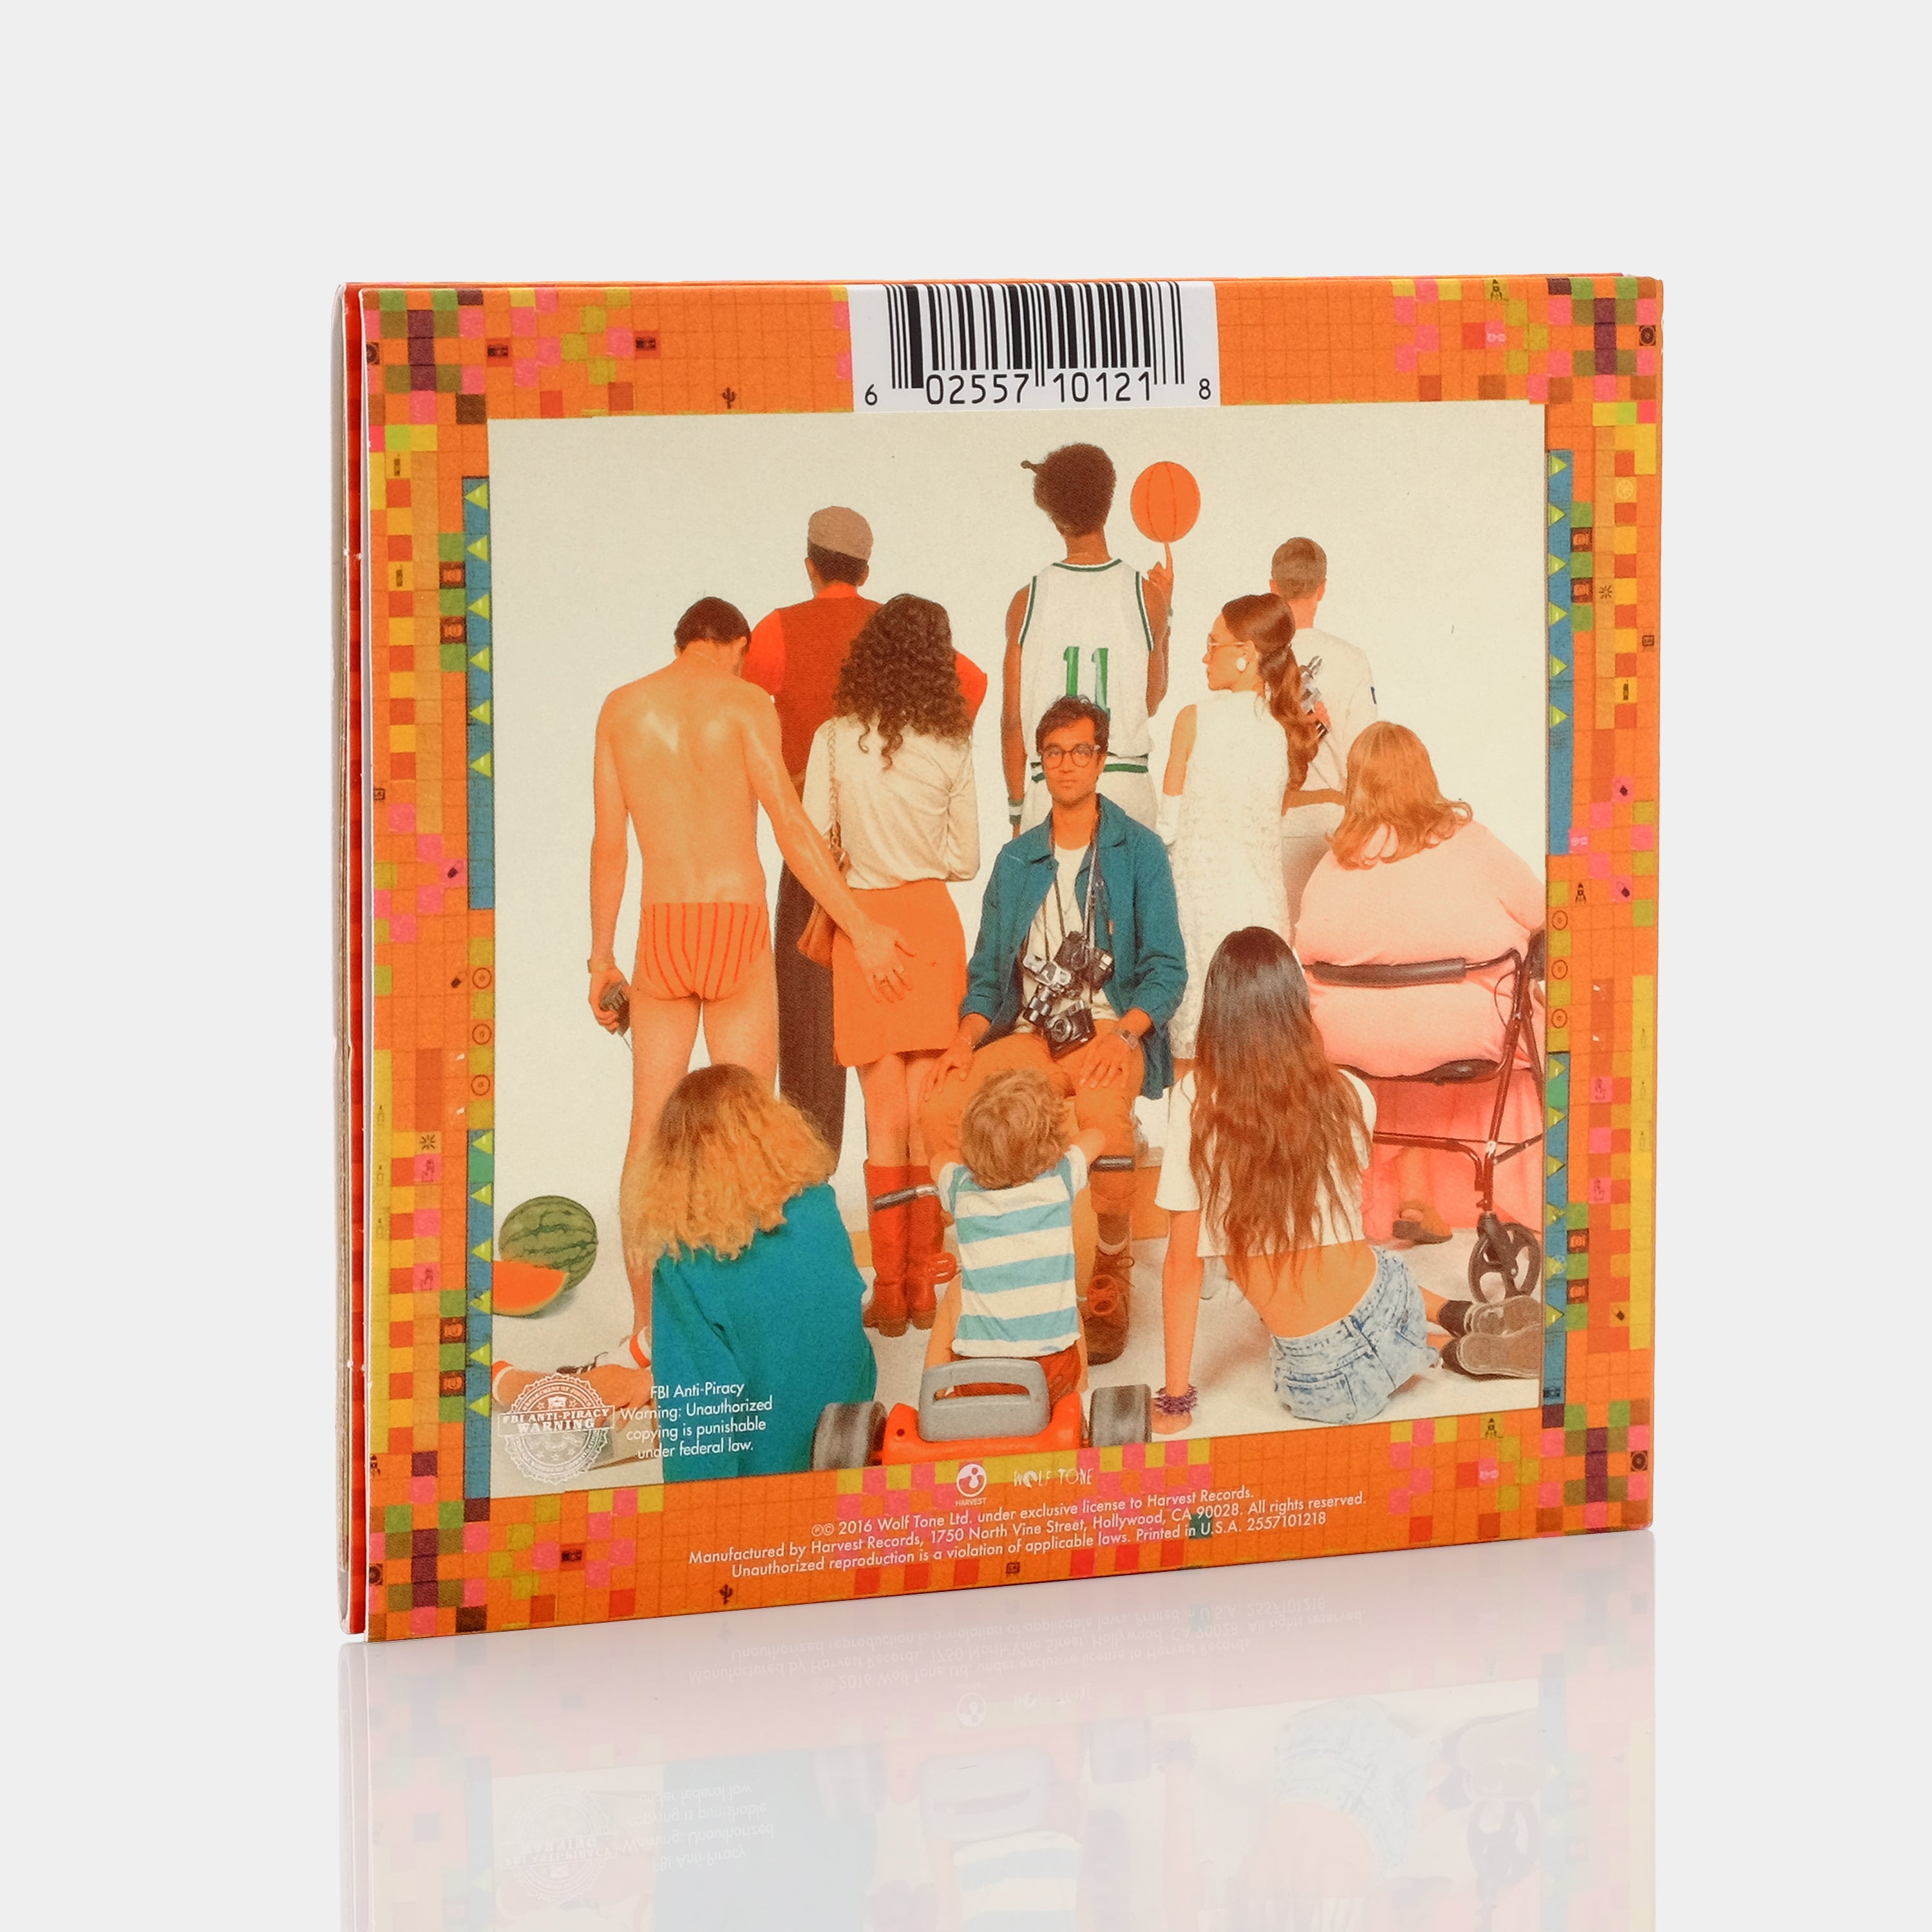 Glass Animals - How To Be A Human Being CD